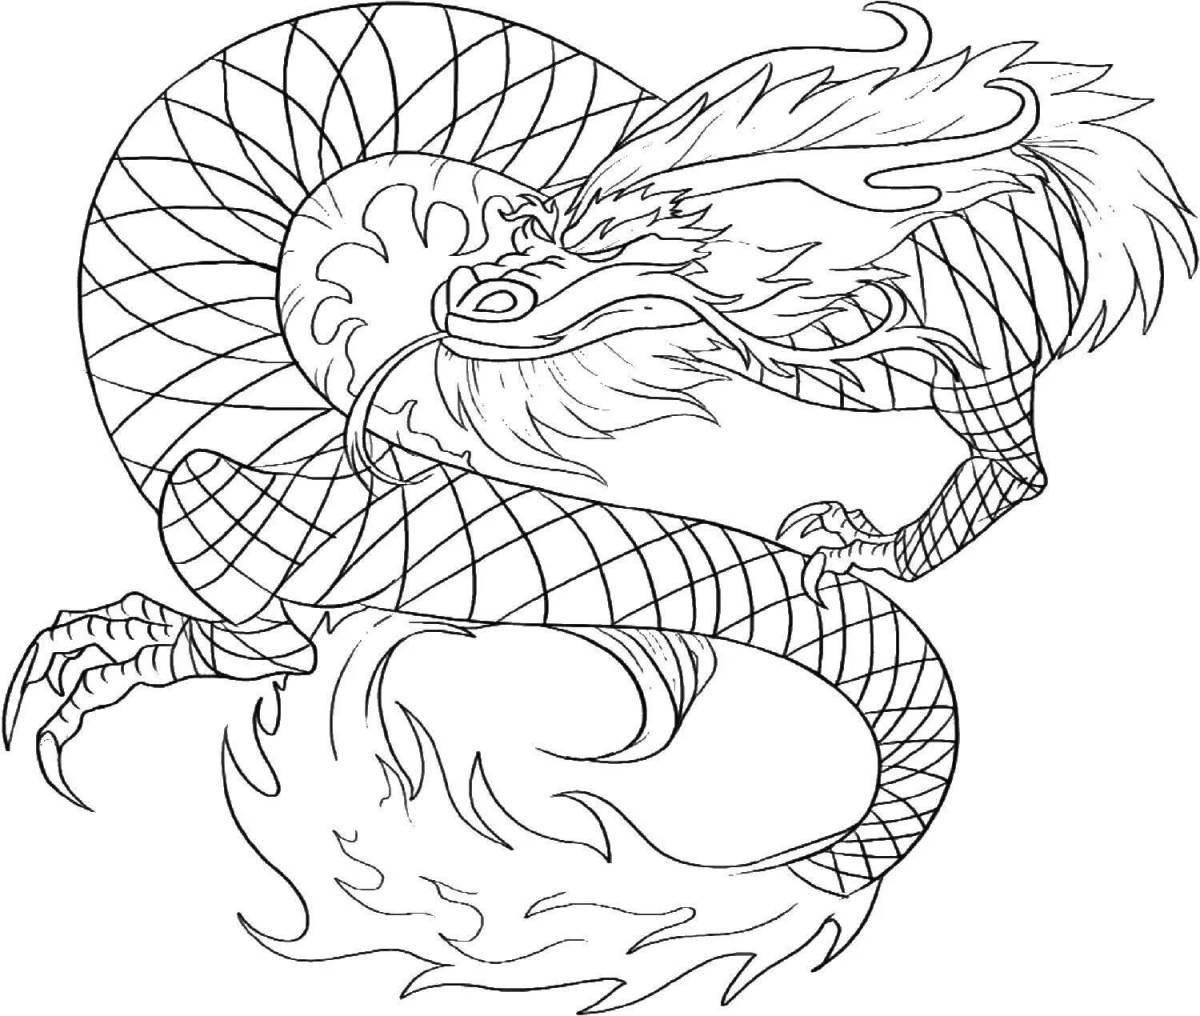 Radiant coloring page dragon figure